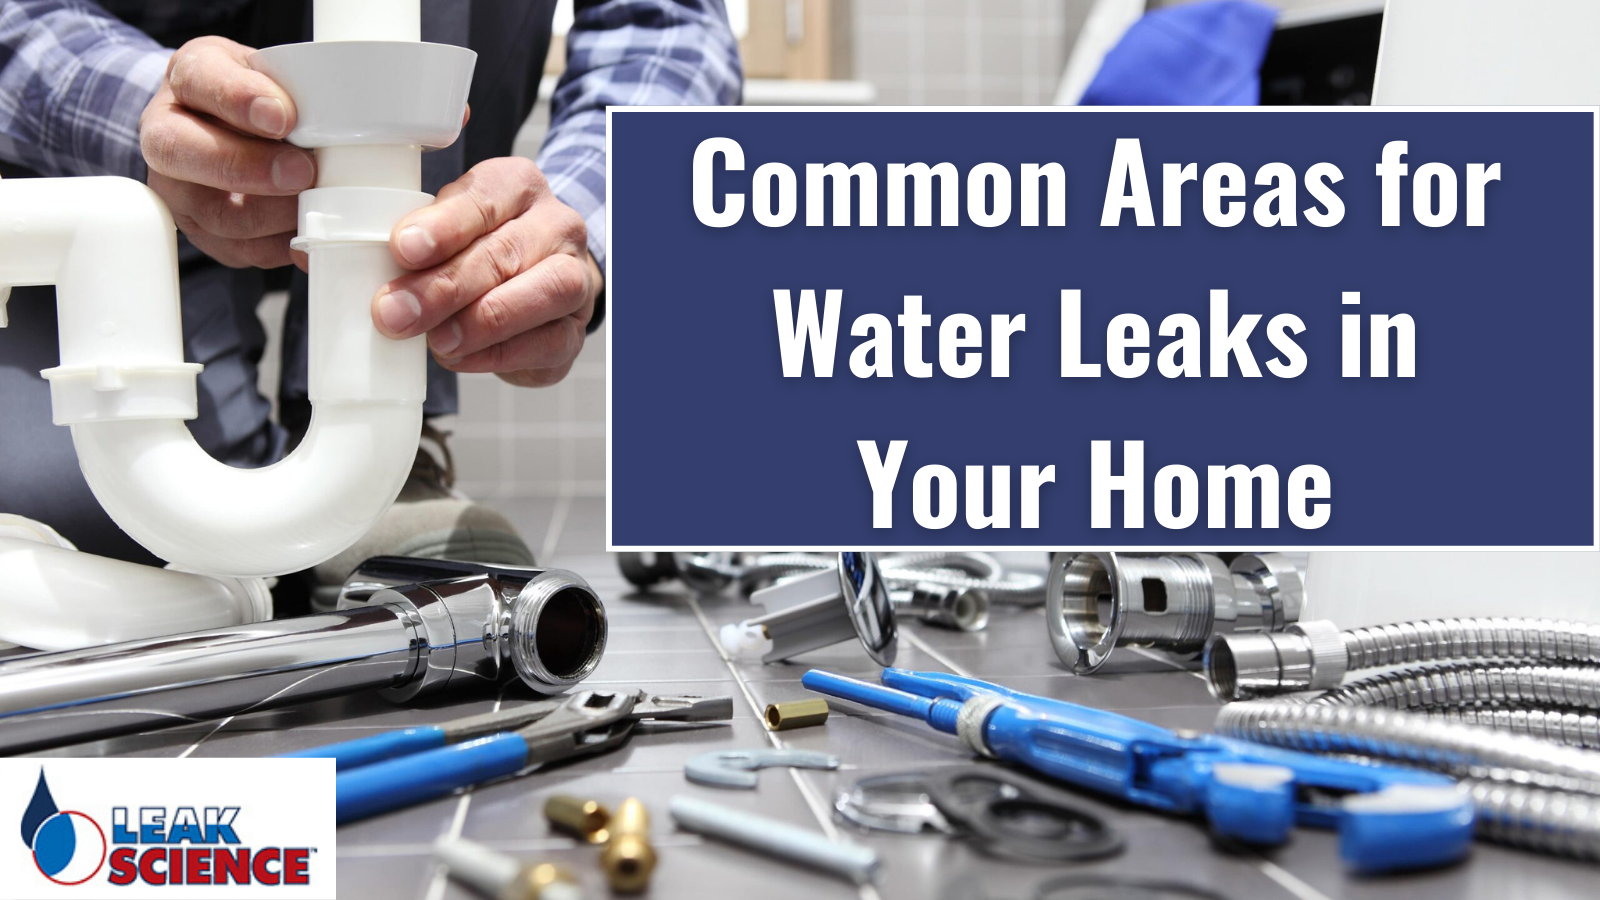 Common Areas for Water Leaks in Your Home